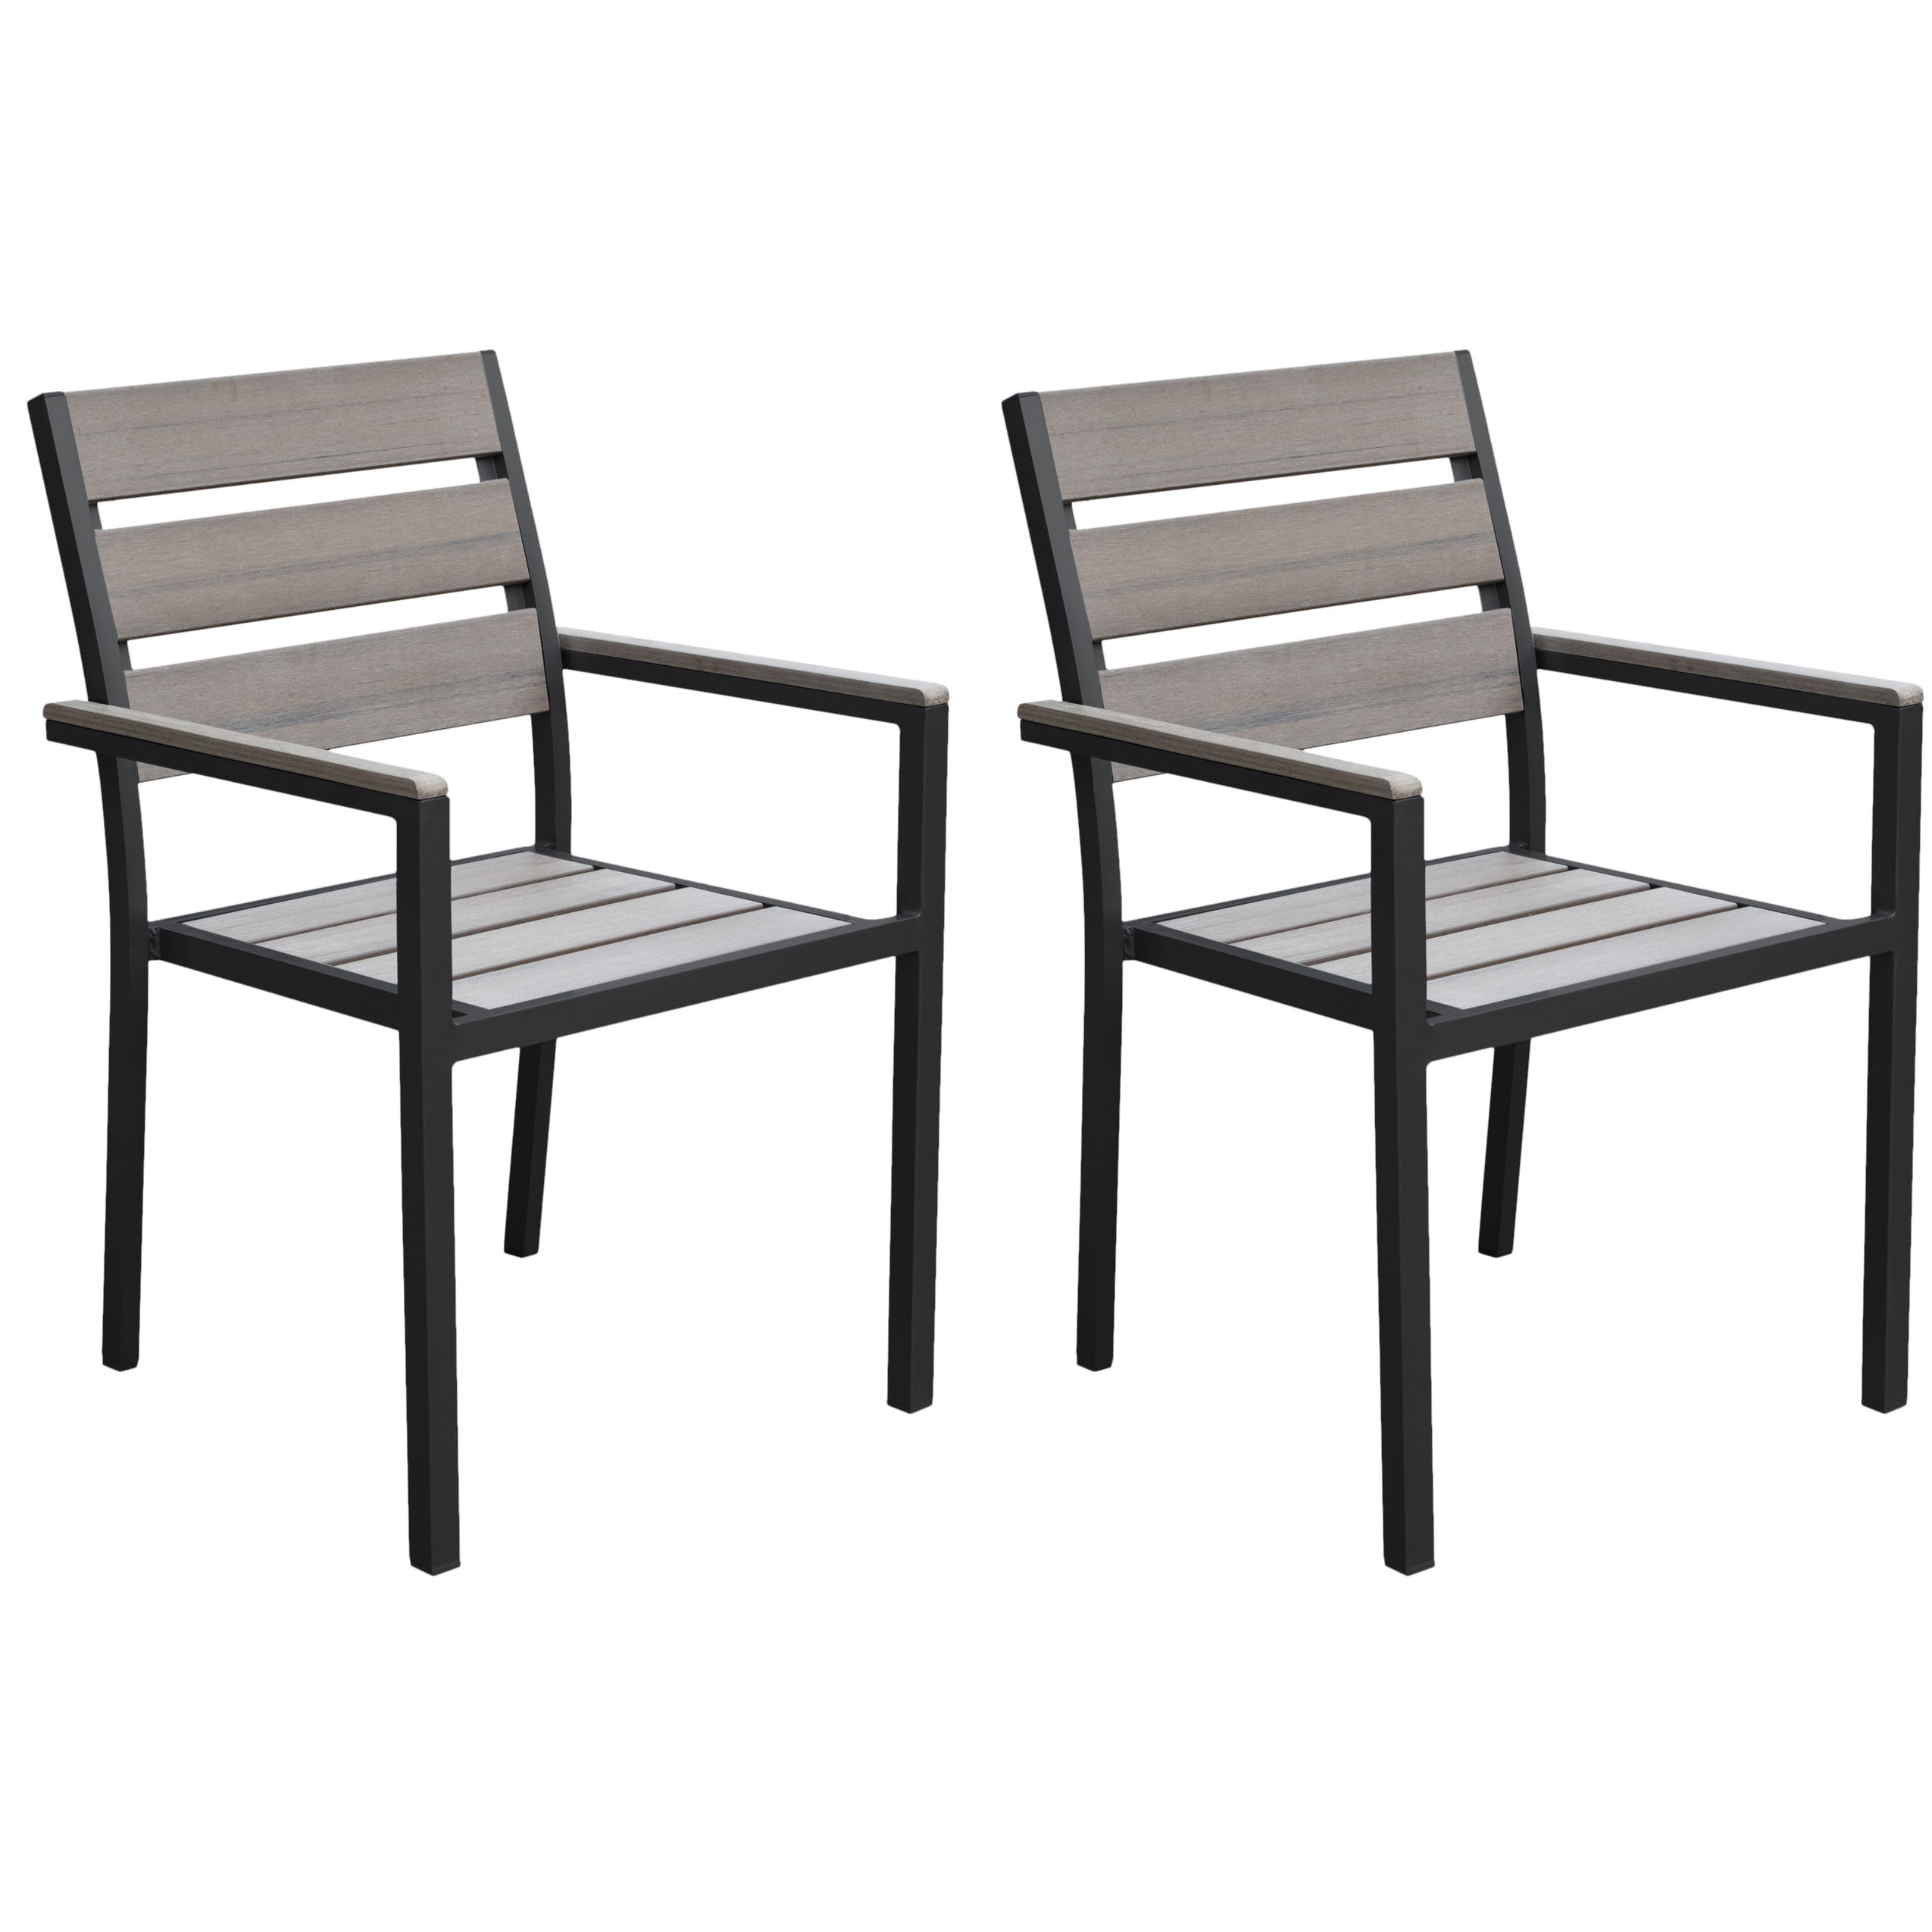 in Stationary Seat Chairs Dining Gallant at Coated Black Chair(s) Stackable 2 the Frame CorLiving Set Patio Powder Slat department Aluminum with of